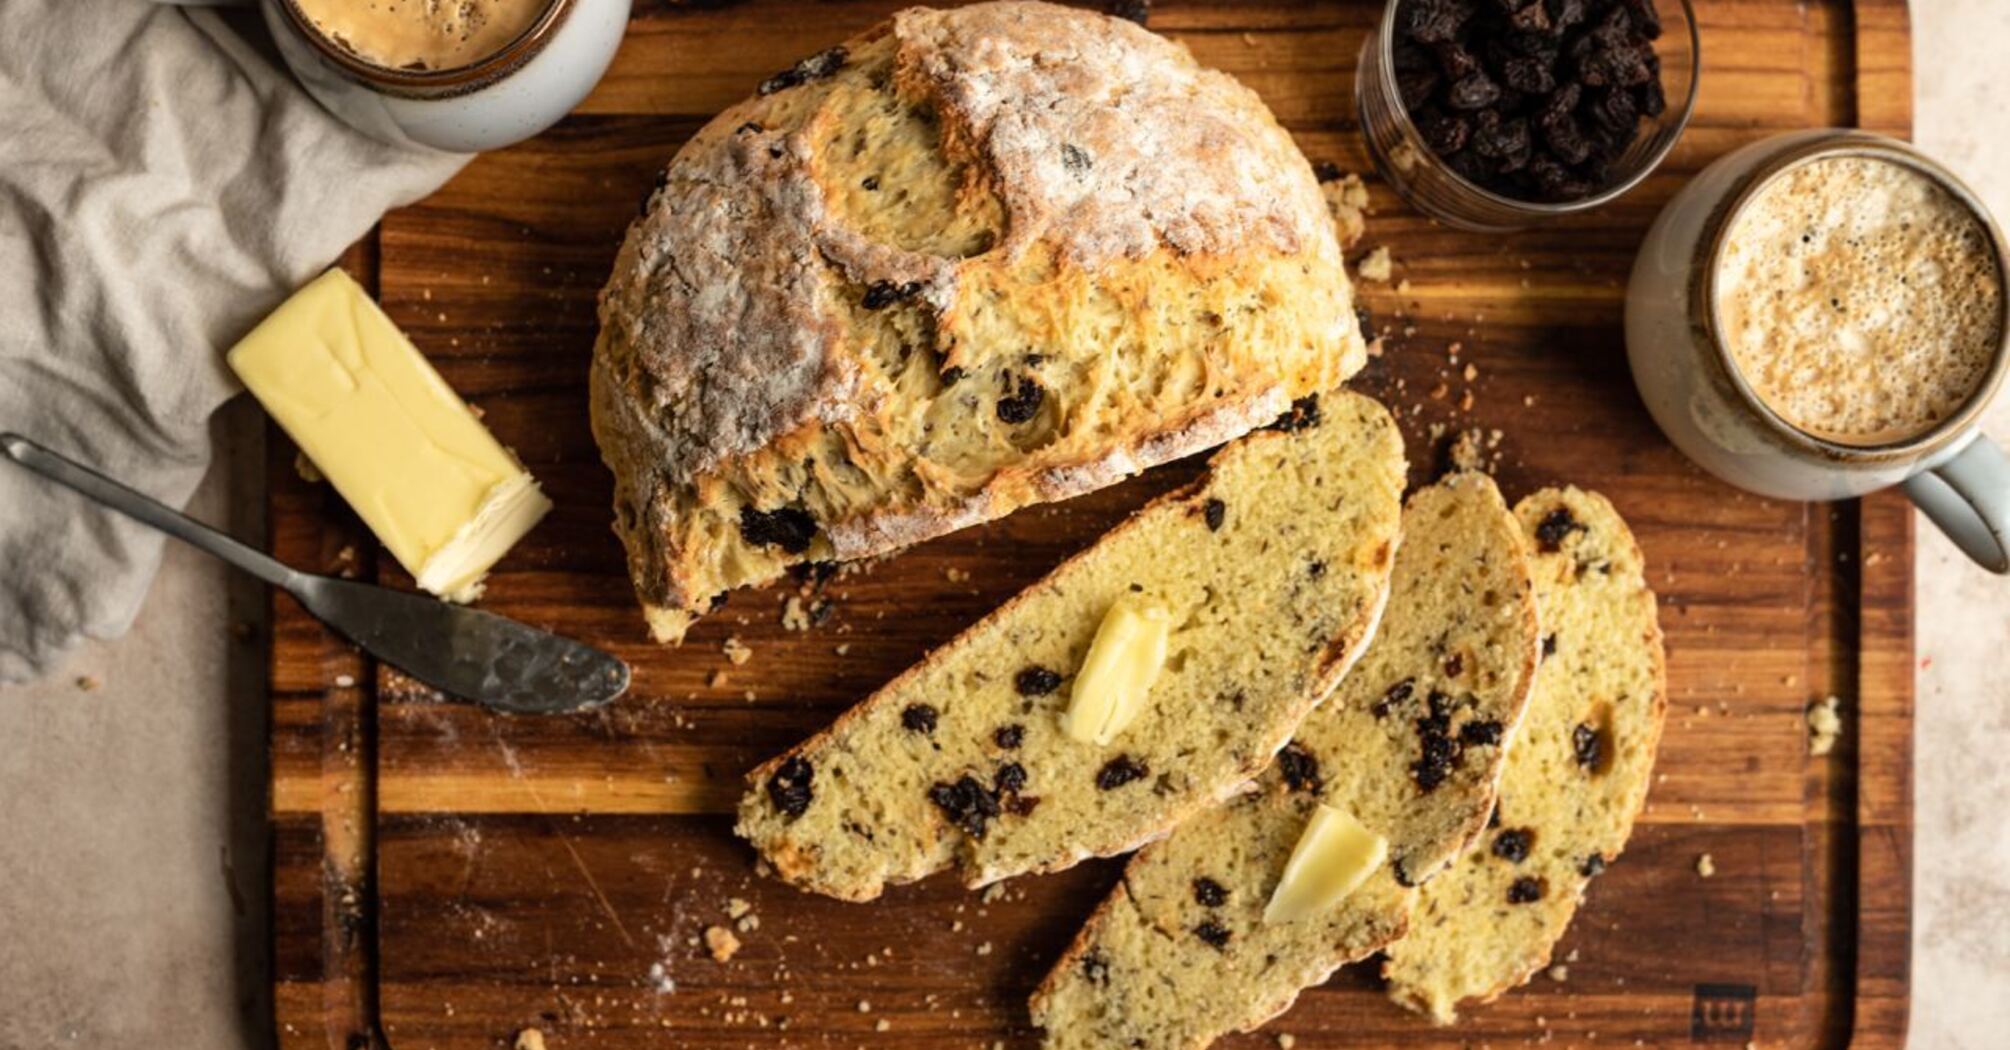 How to make sure soda bread is ready?